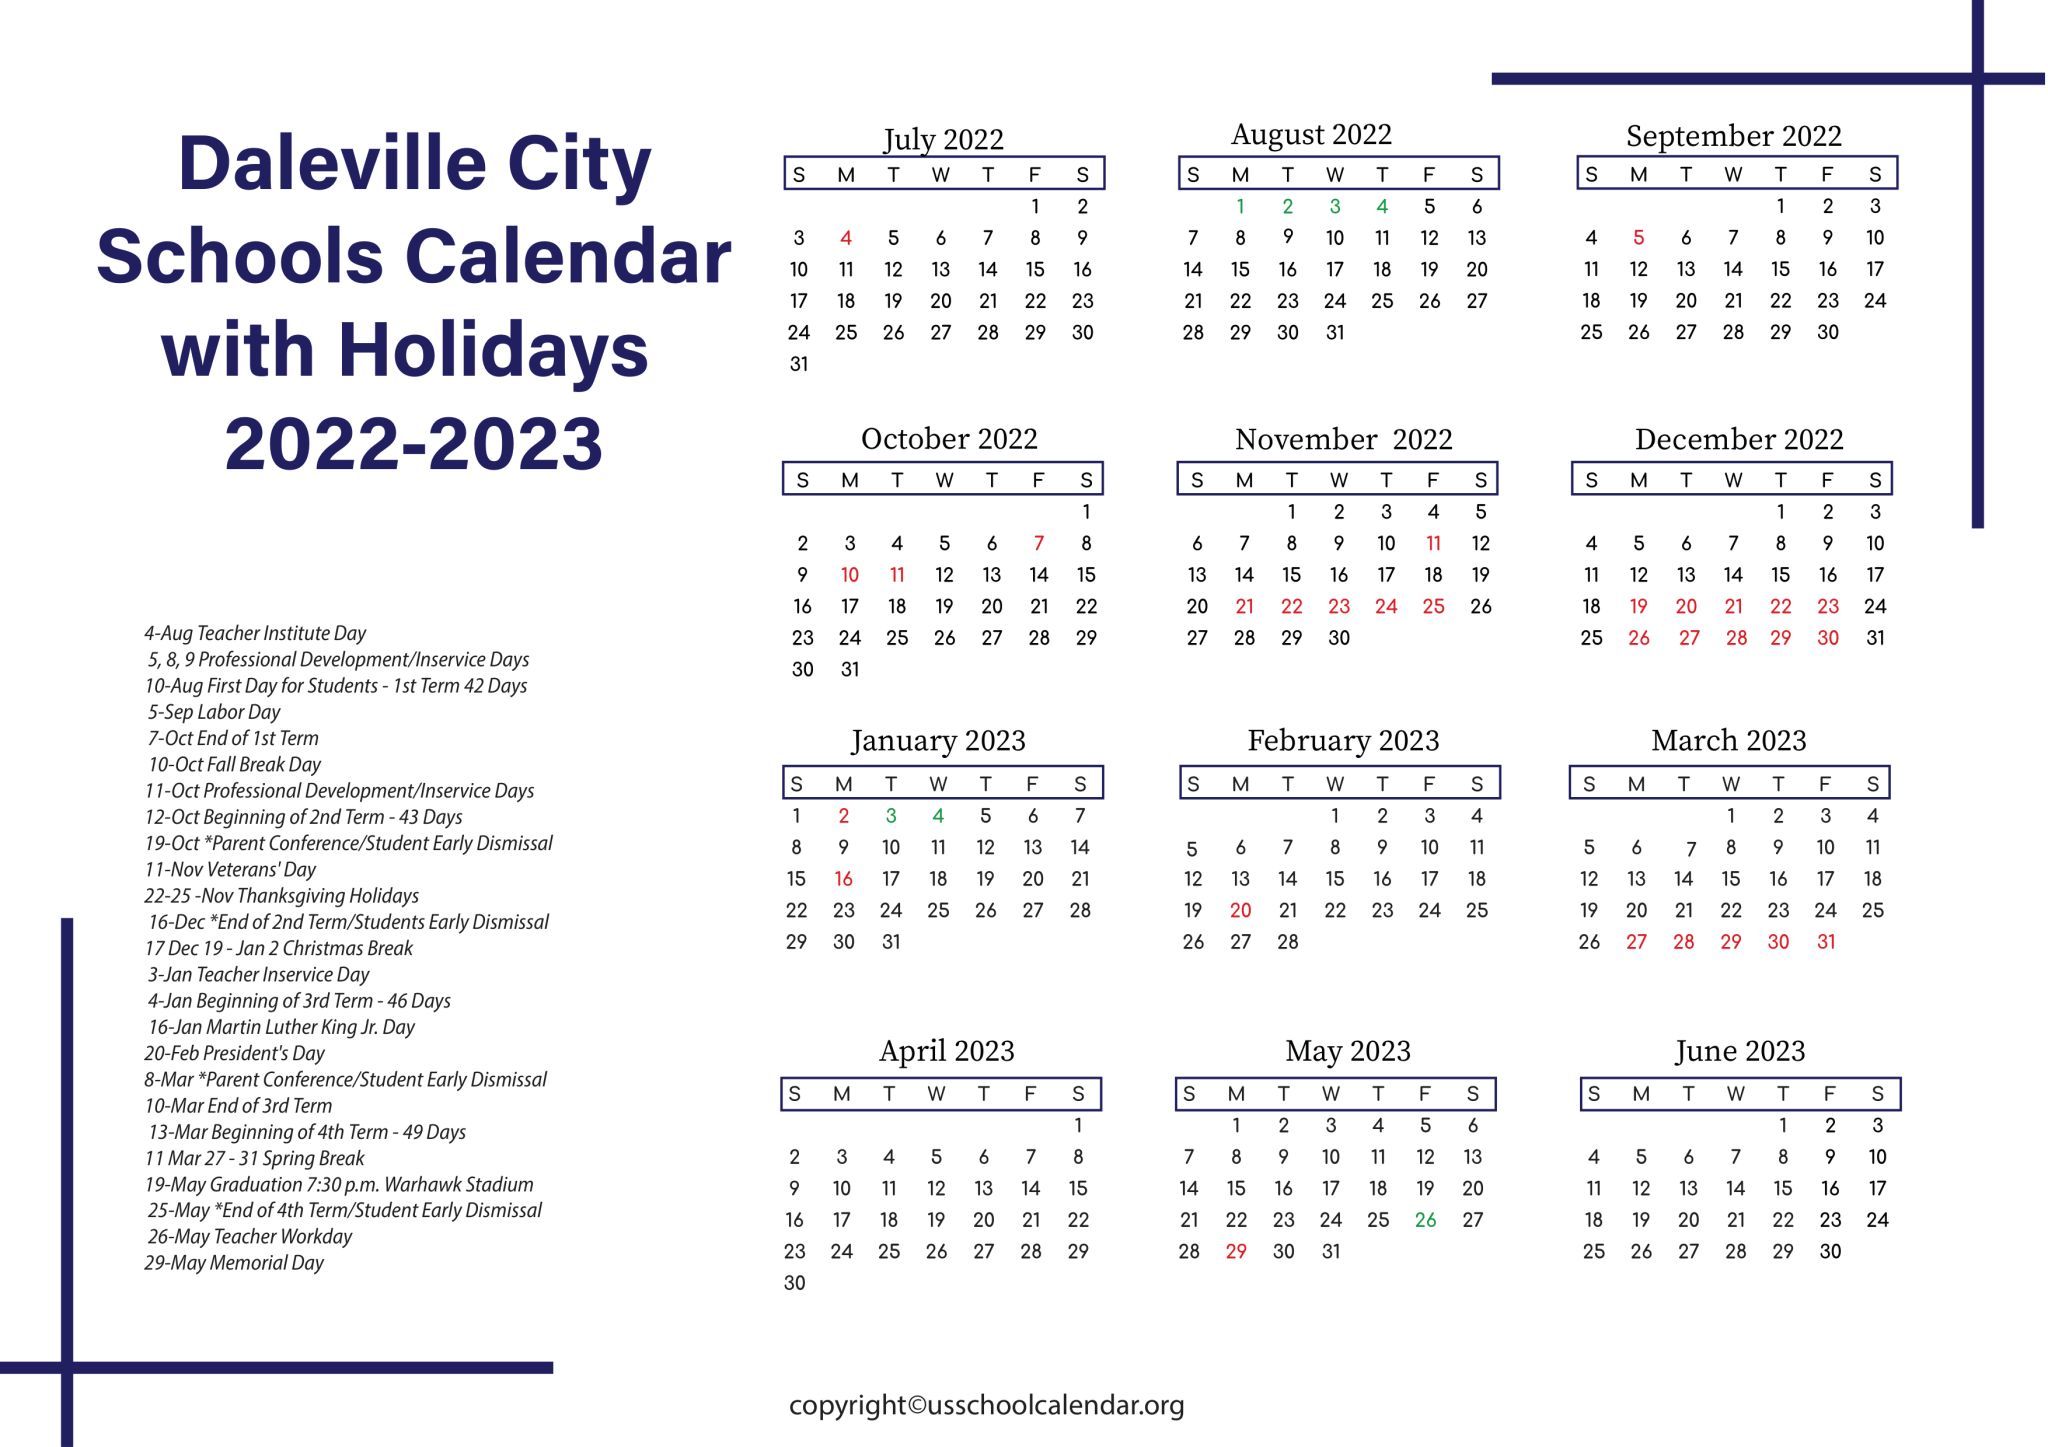 Daleville City Schools Calendar with Holidays 2023